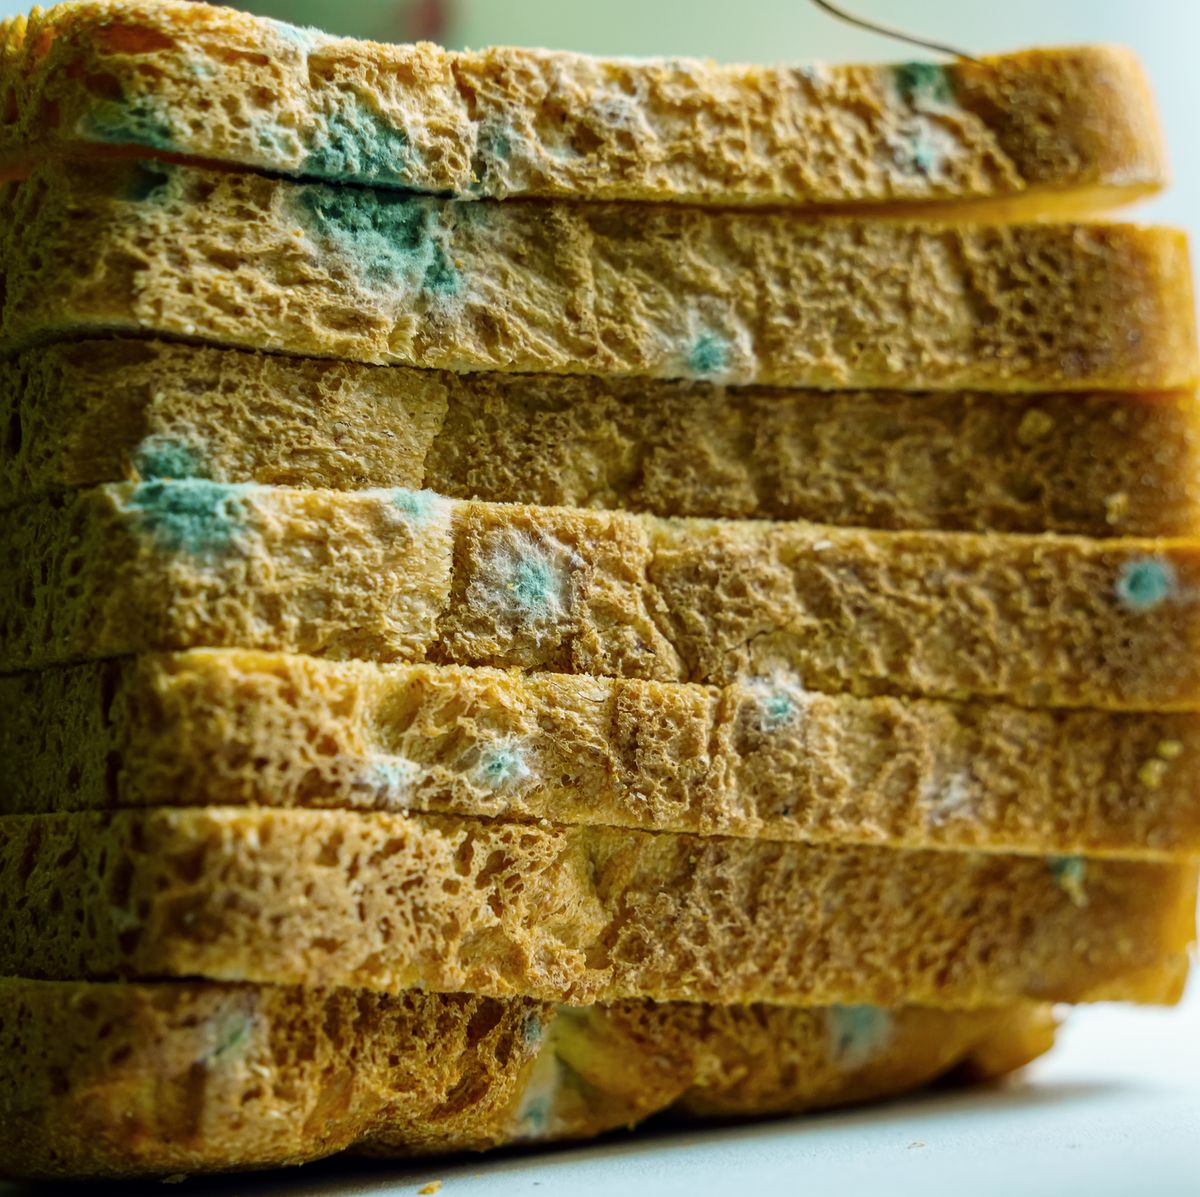 What You Need To Know About Moldy Food